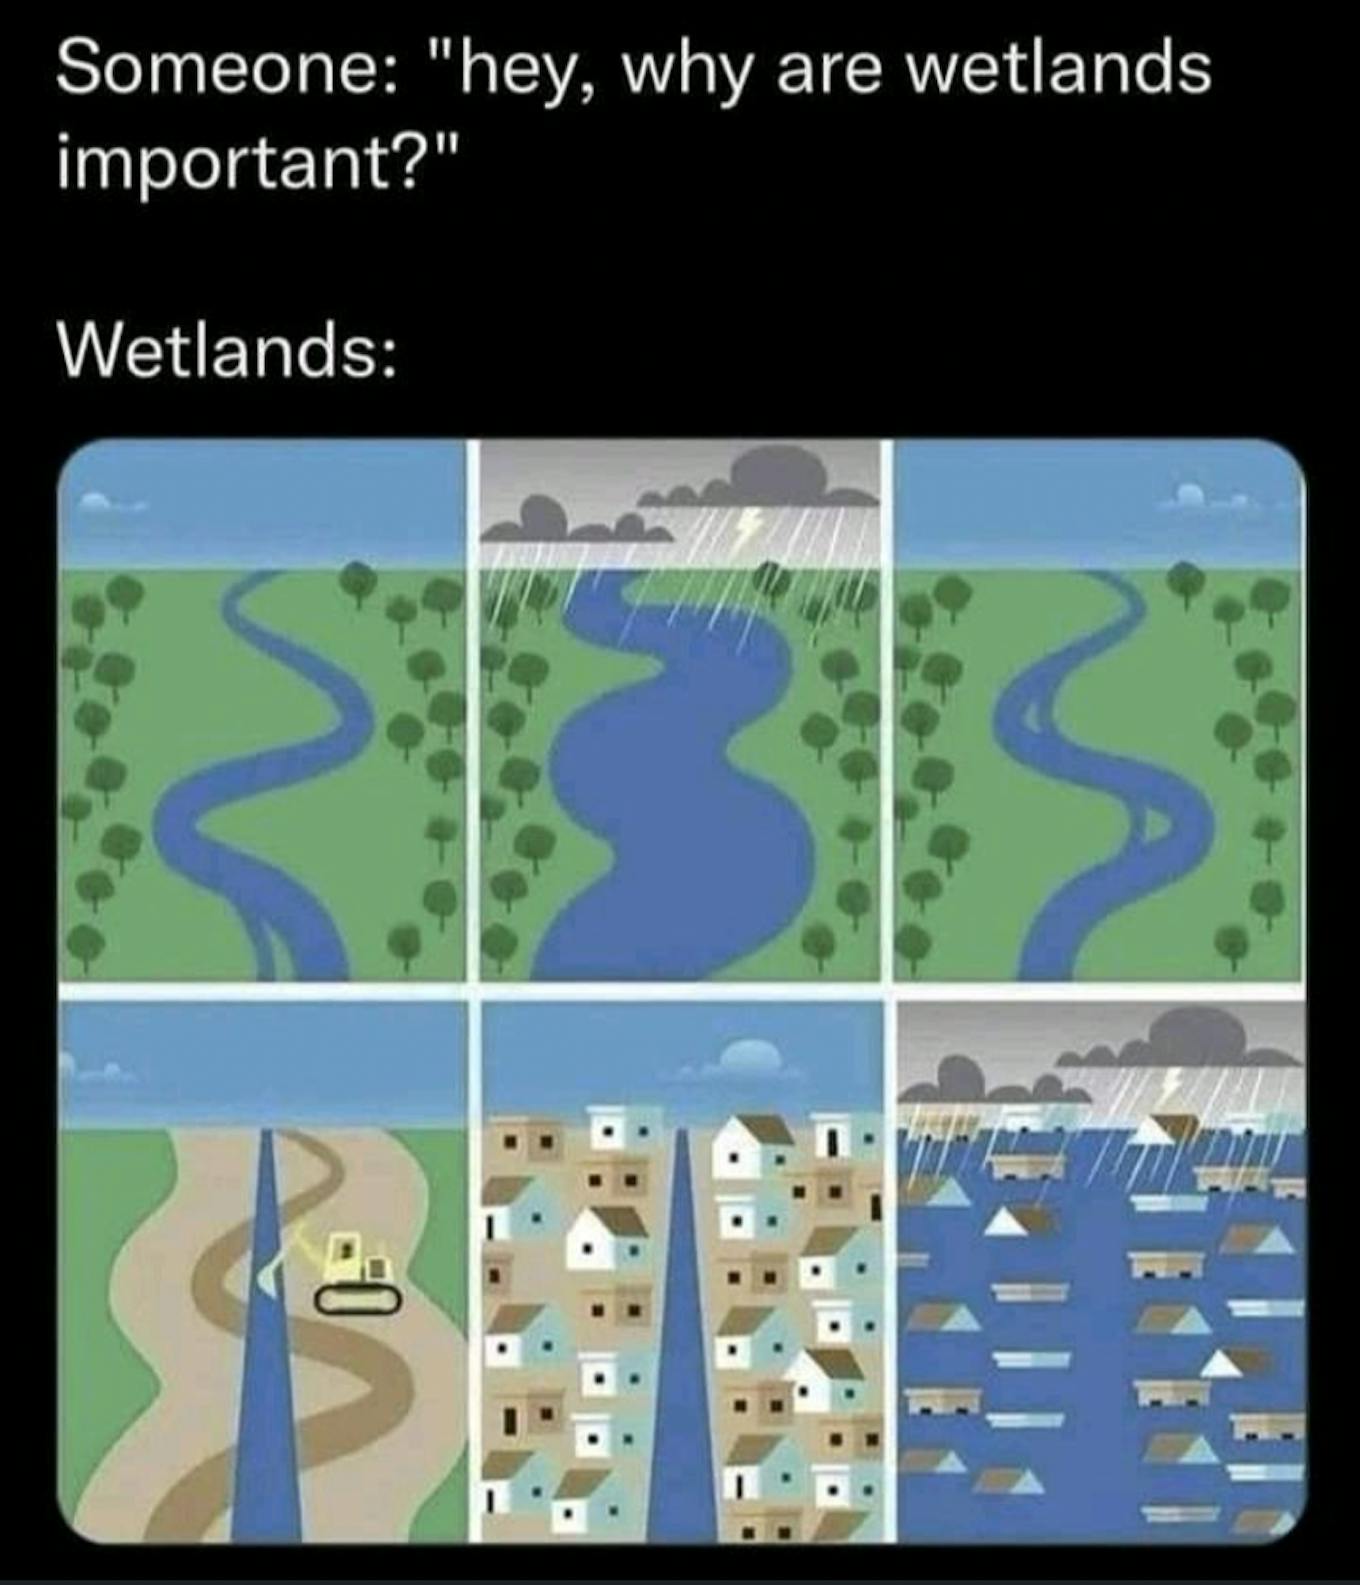 Why are wetlands important cartoon